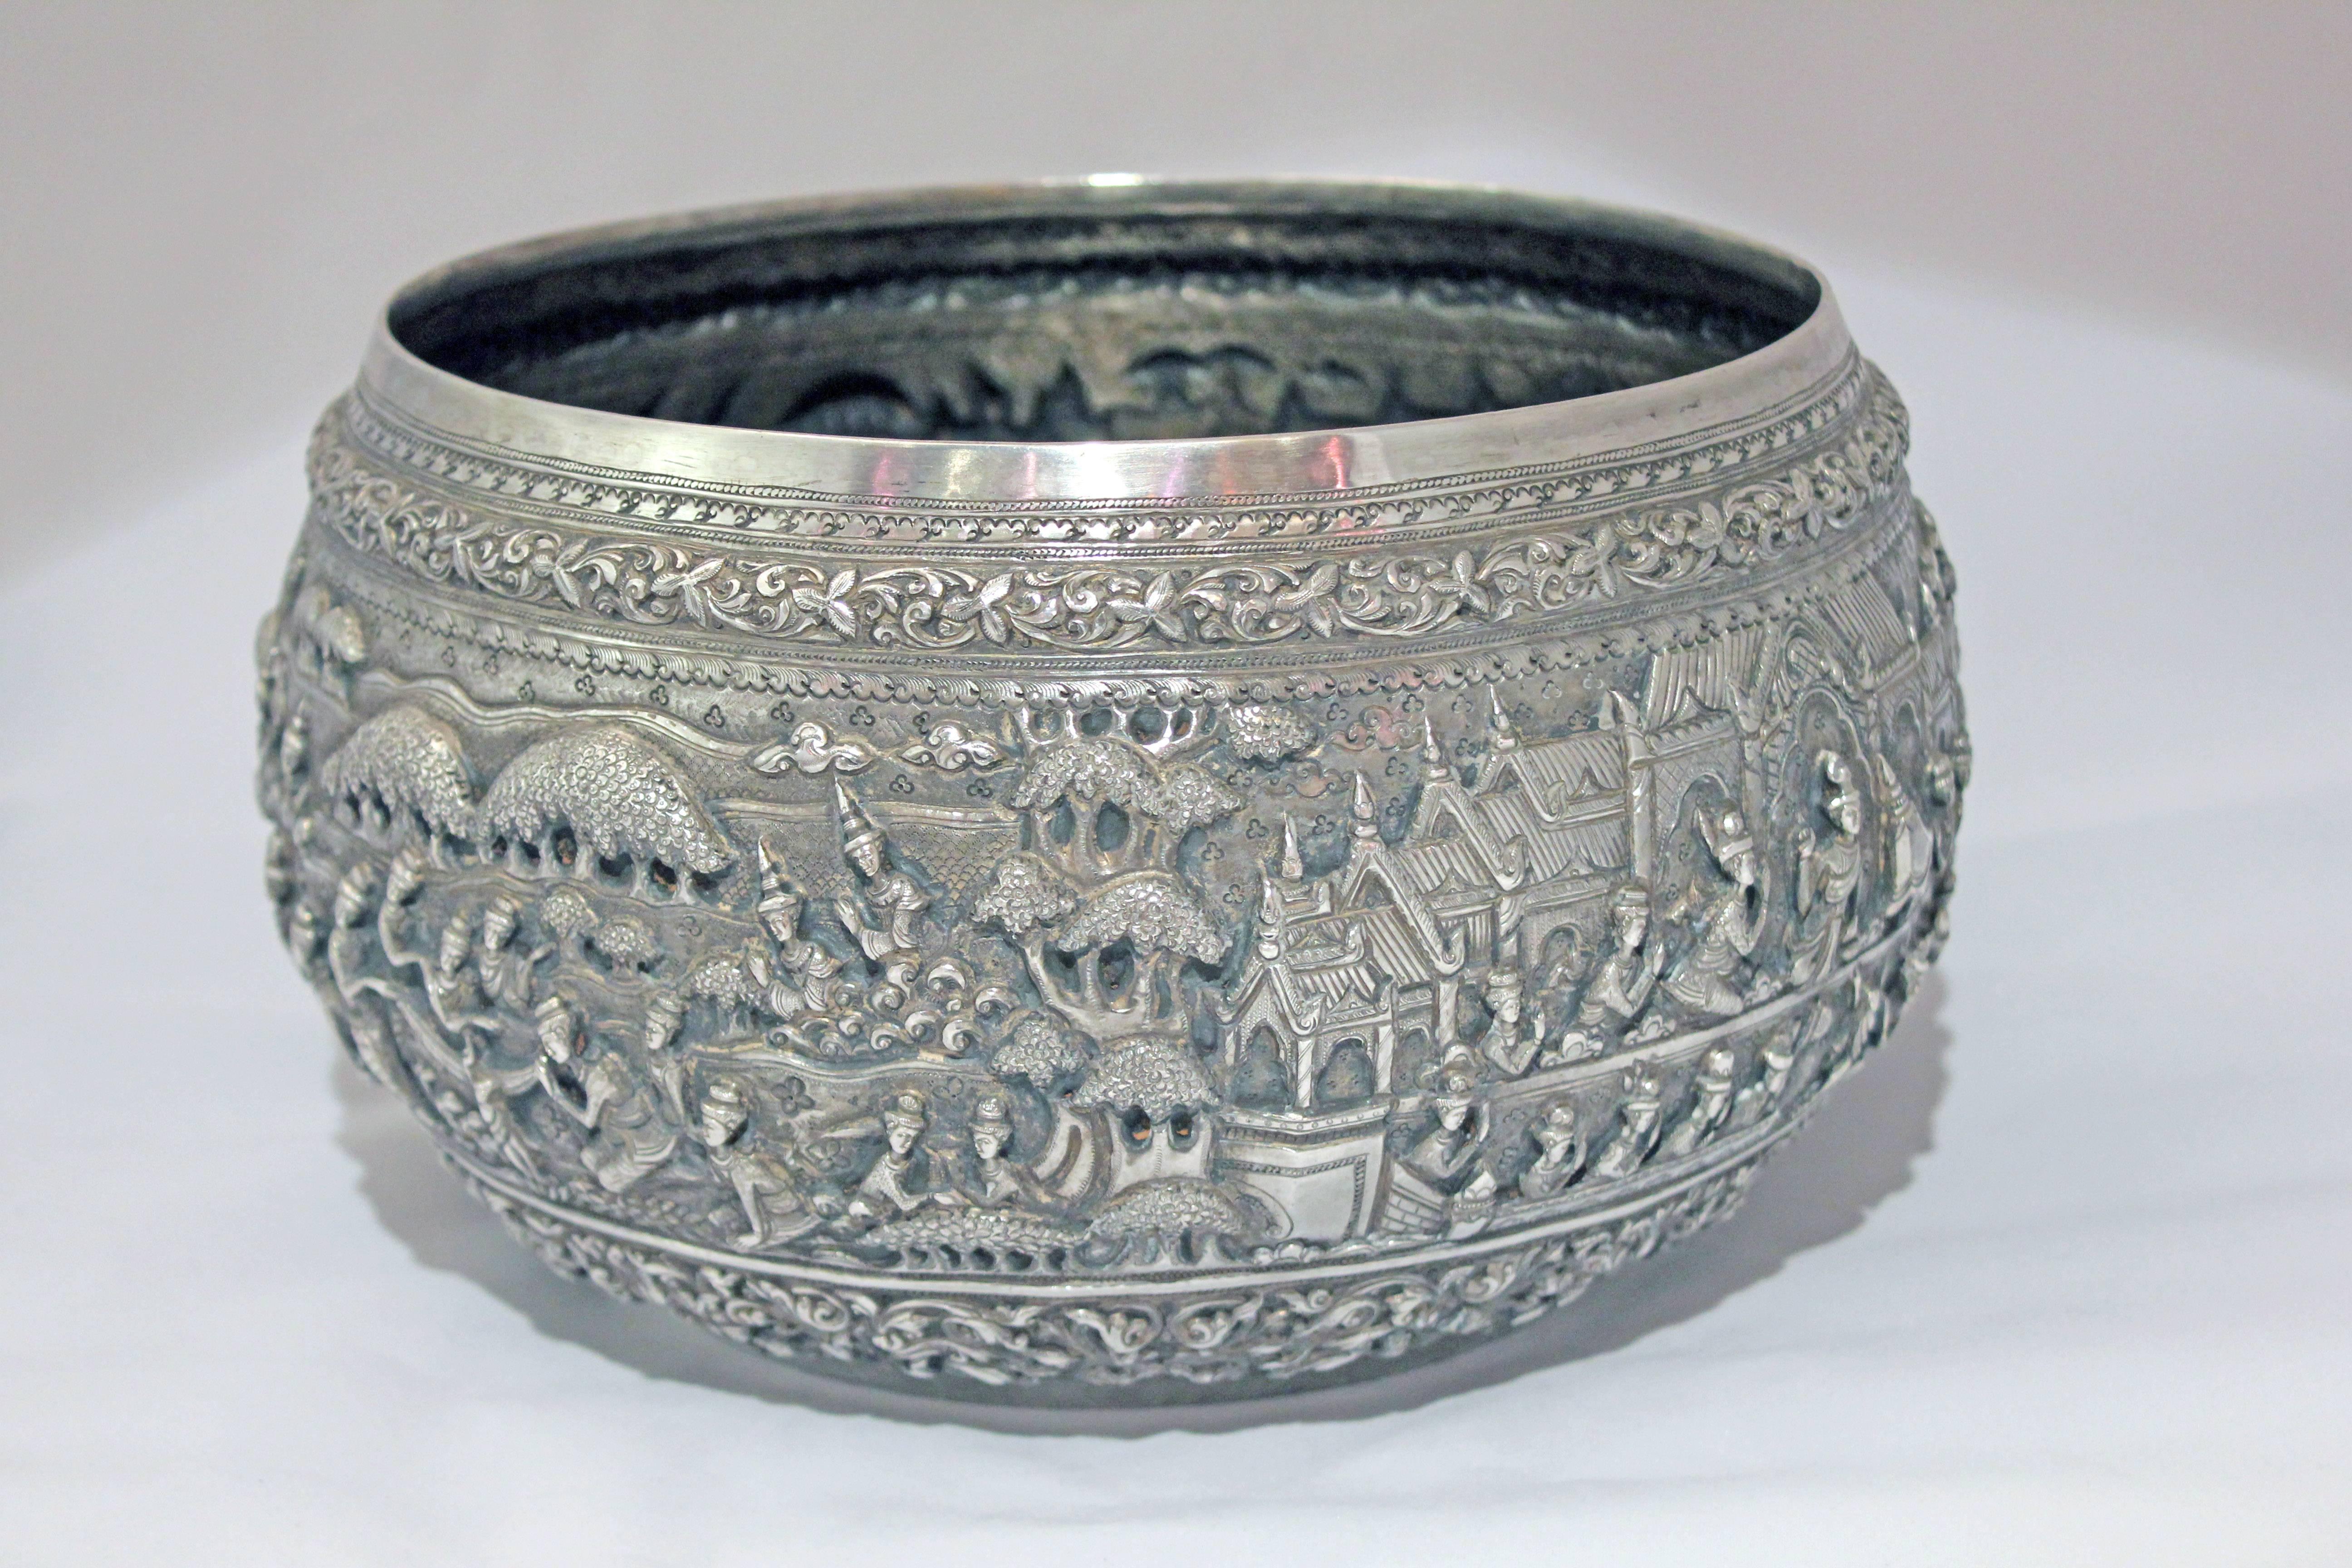 The silver bowl with finely chased details in high relief depicts scenes from the Jataka tales. These tales are moralistic tales, either from the lives of the Buddha or parables taught by Buddha. The rim and the base of the bowl are   finely